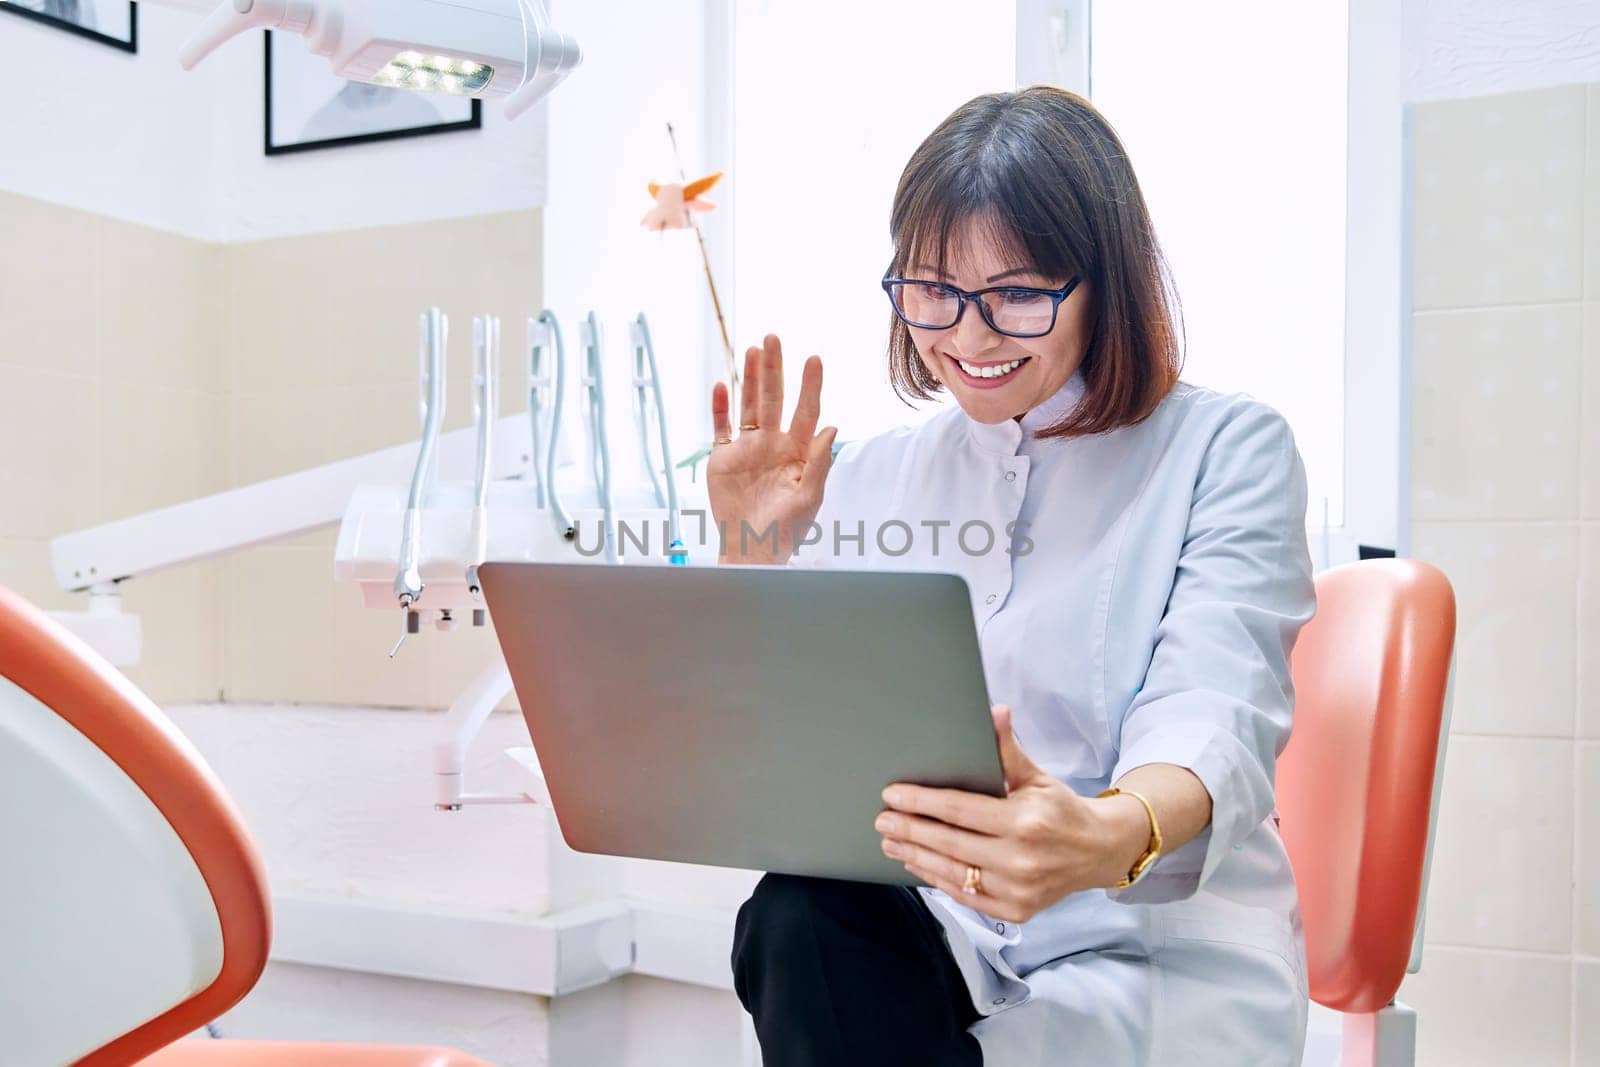 Online consultation, doctor help in clinic using laptop. Female dentist talking looking in laptop in dental office. Video conference, videocall, service, dentistry, medicine, technology concept